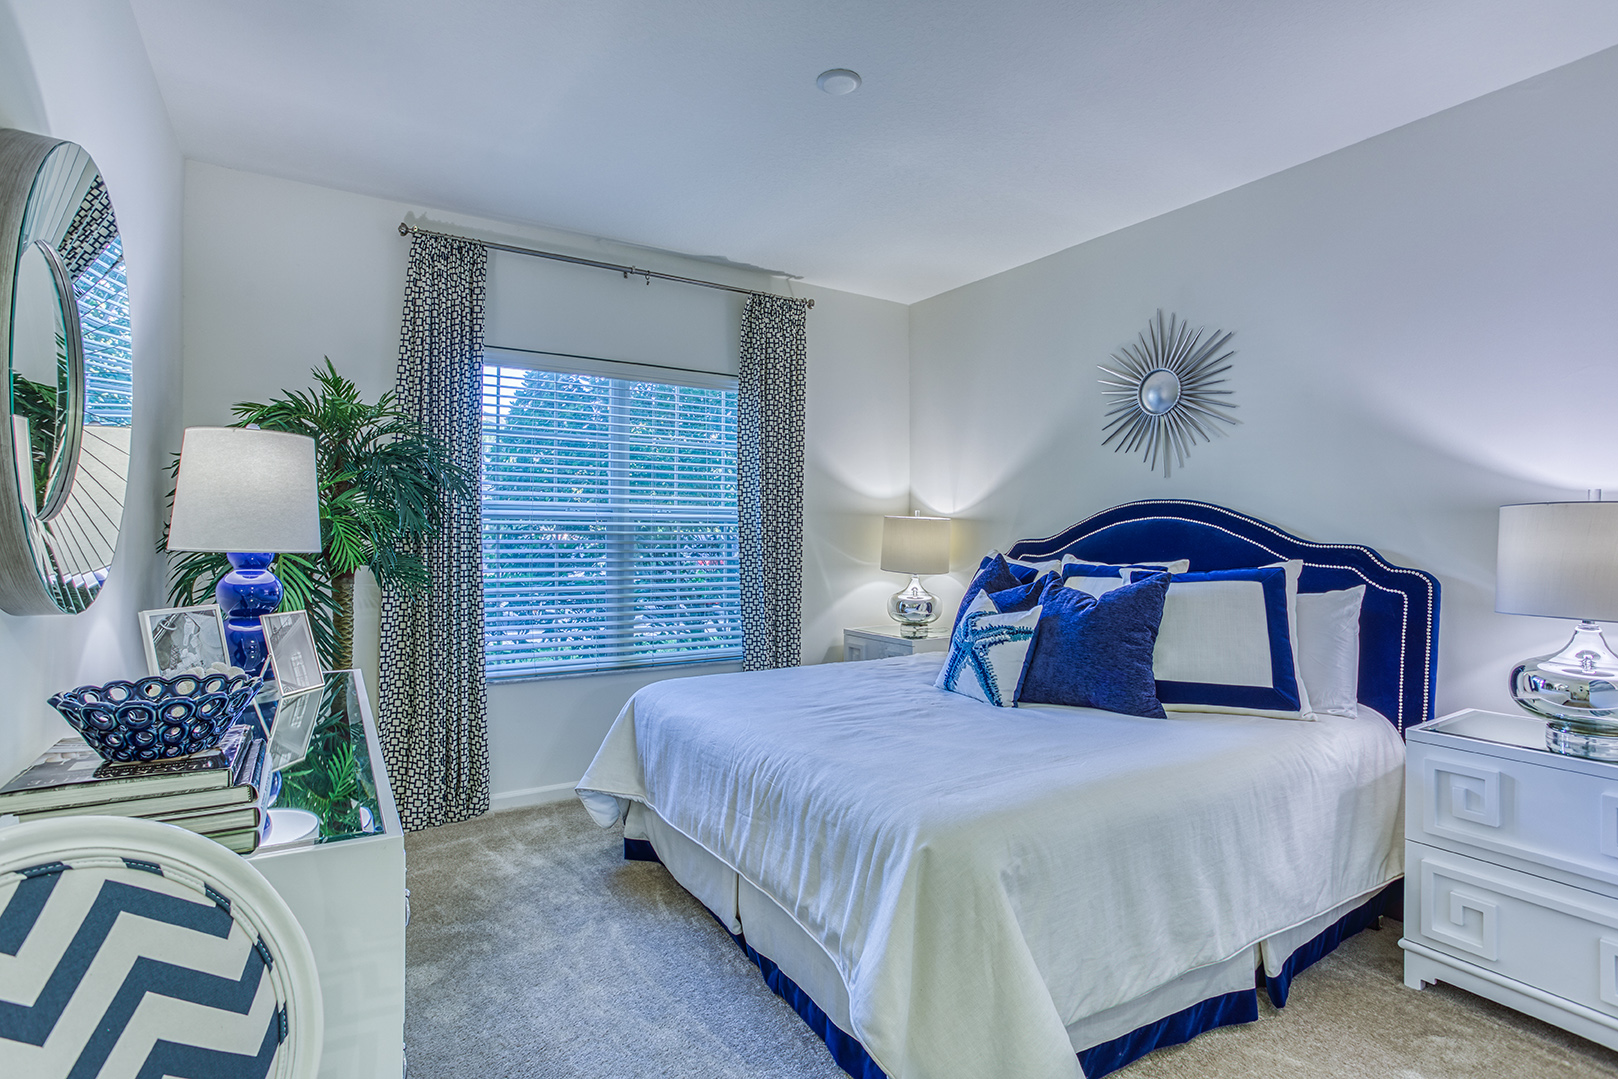 The Links at Pebble Creek Blue Bedroom